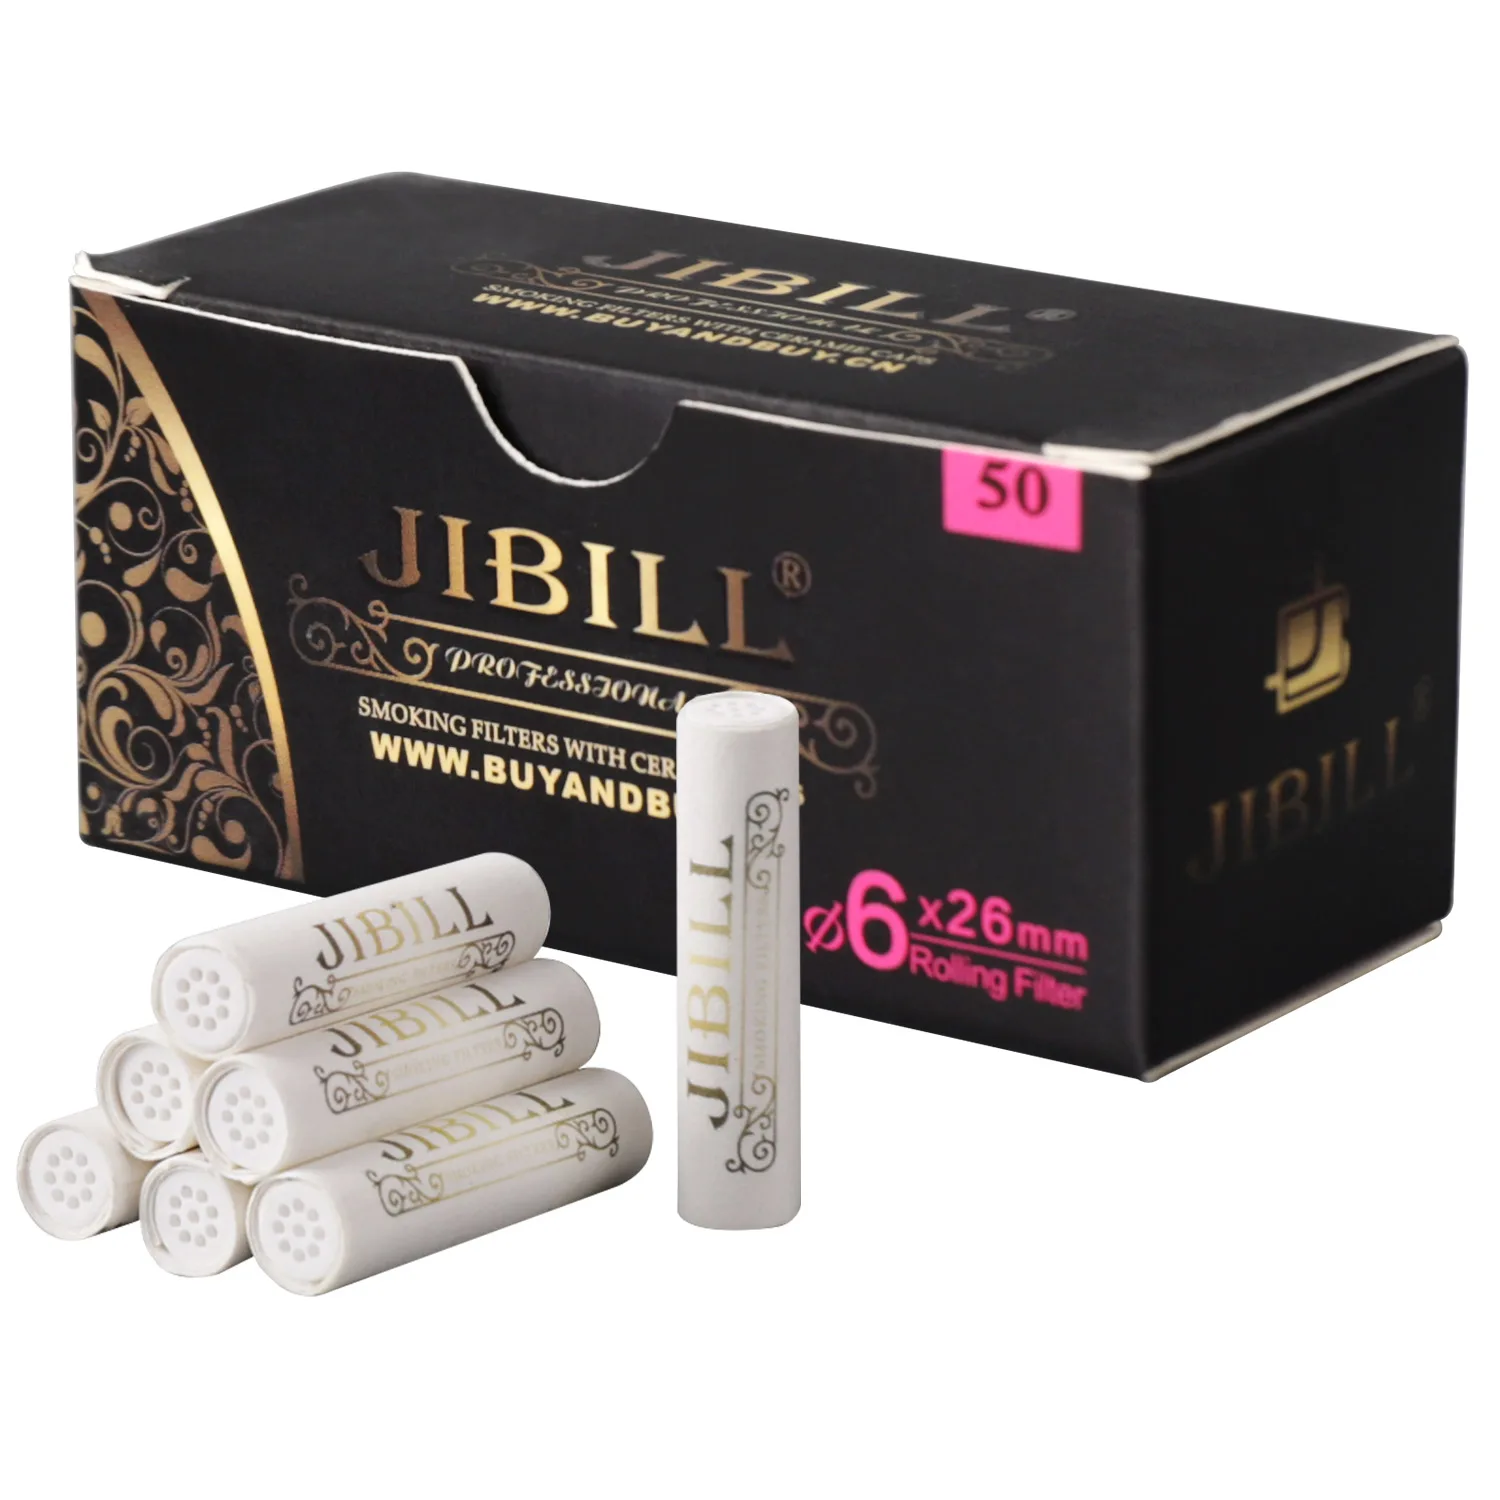 JIBILL 8mm Activated Carbon Filters Smoking Tobacco Pipe Filter Smoking  50pcs